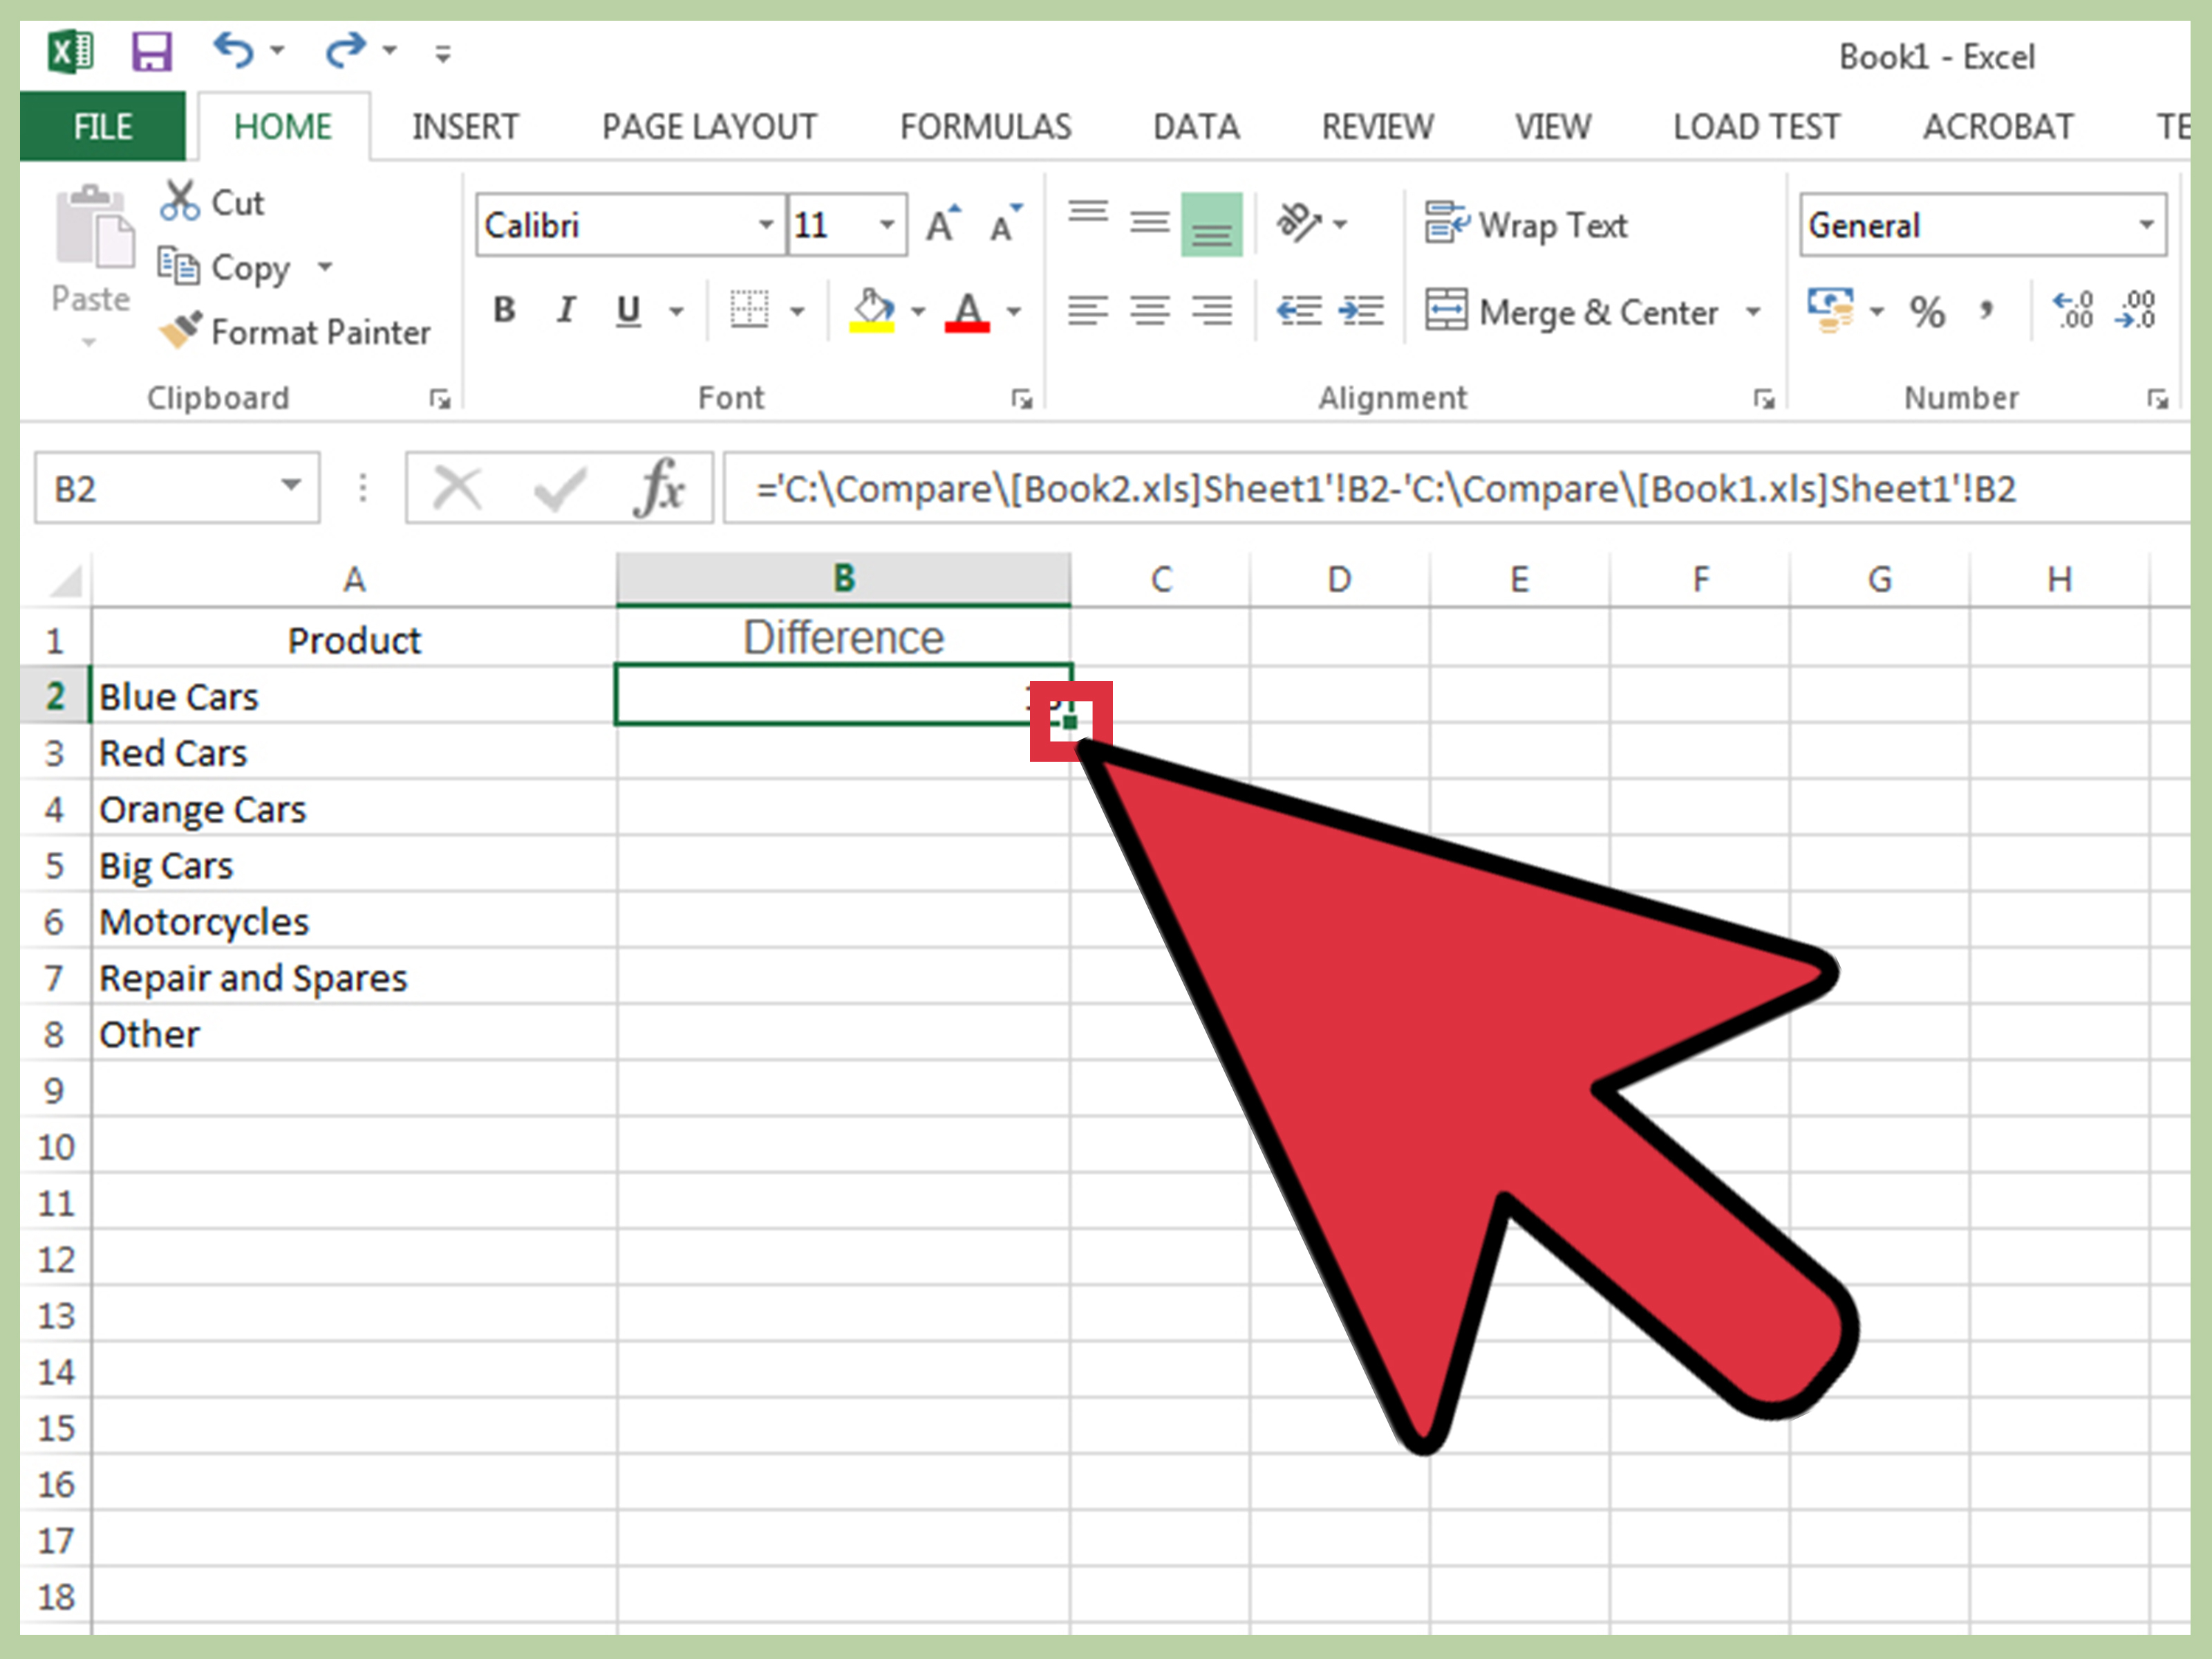 Файл excel. Excel Sheet. Compare file excel. 2 Эксель размер. Compare 2 texts